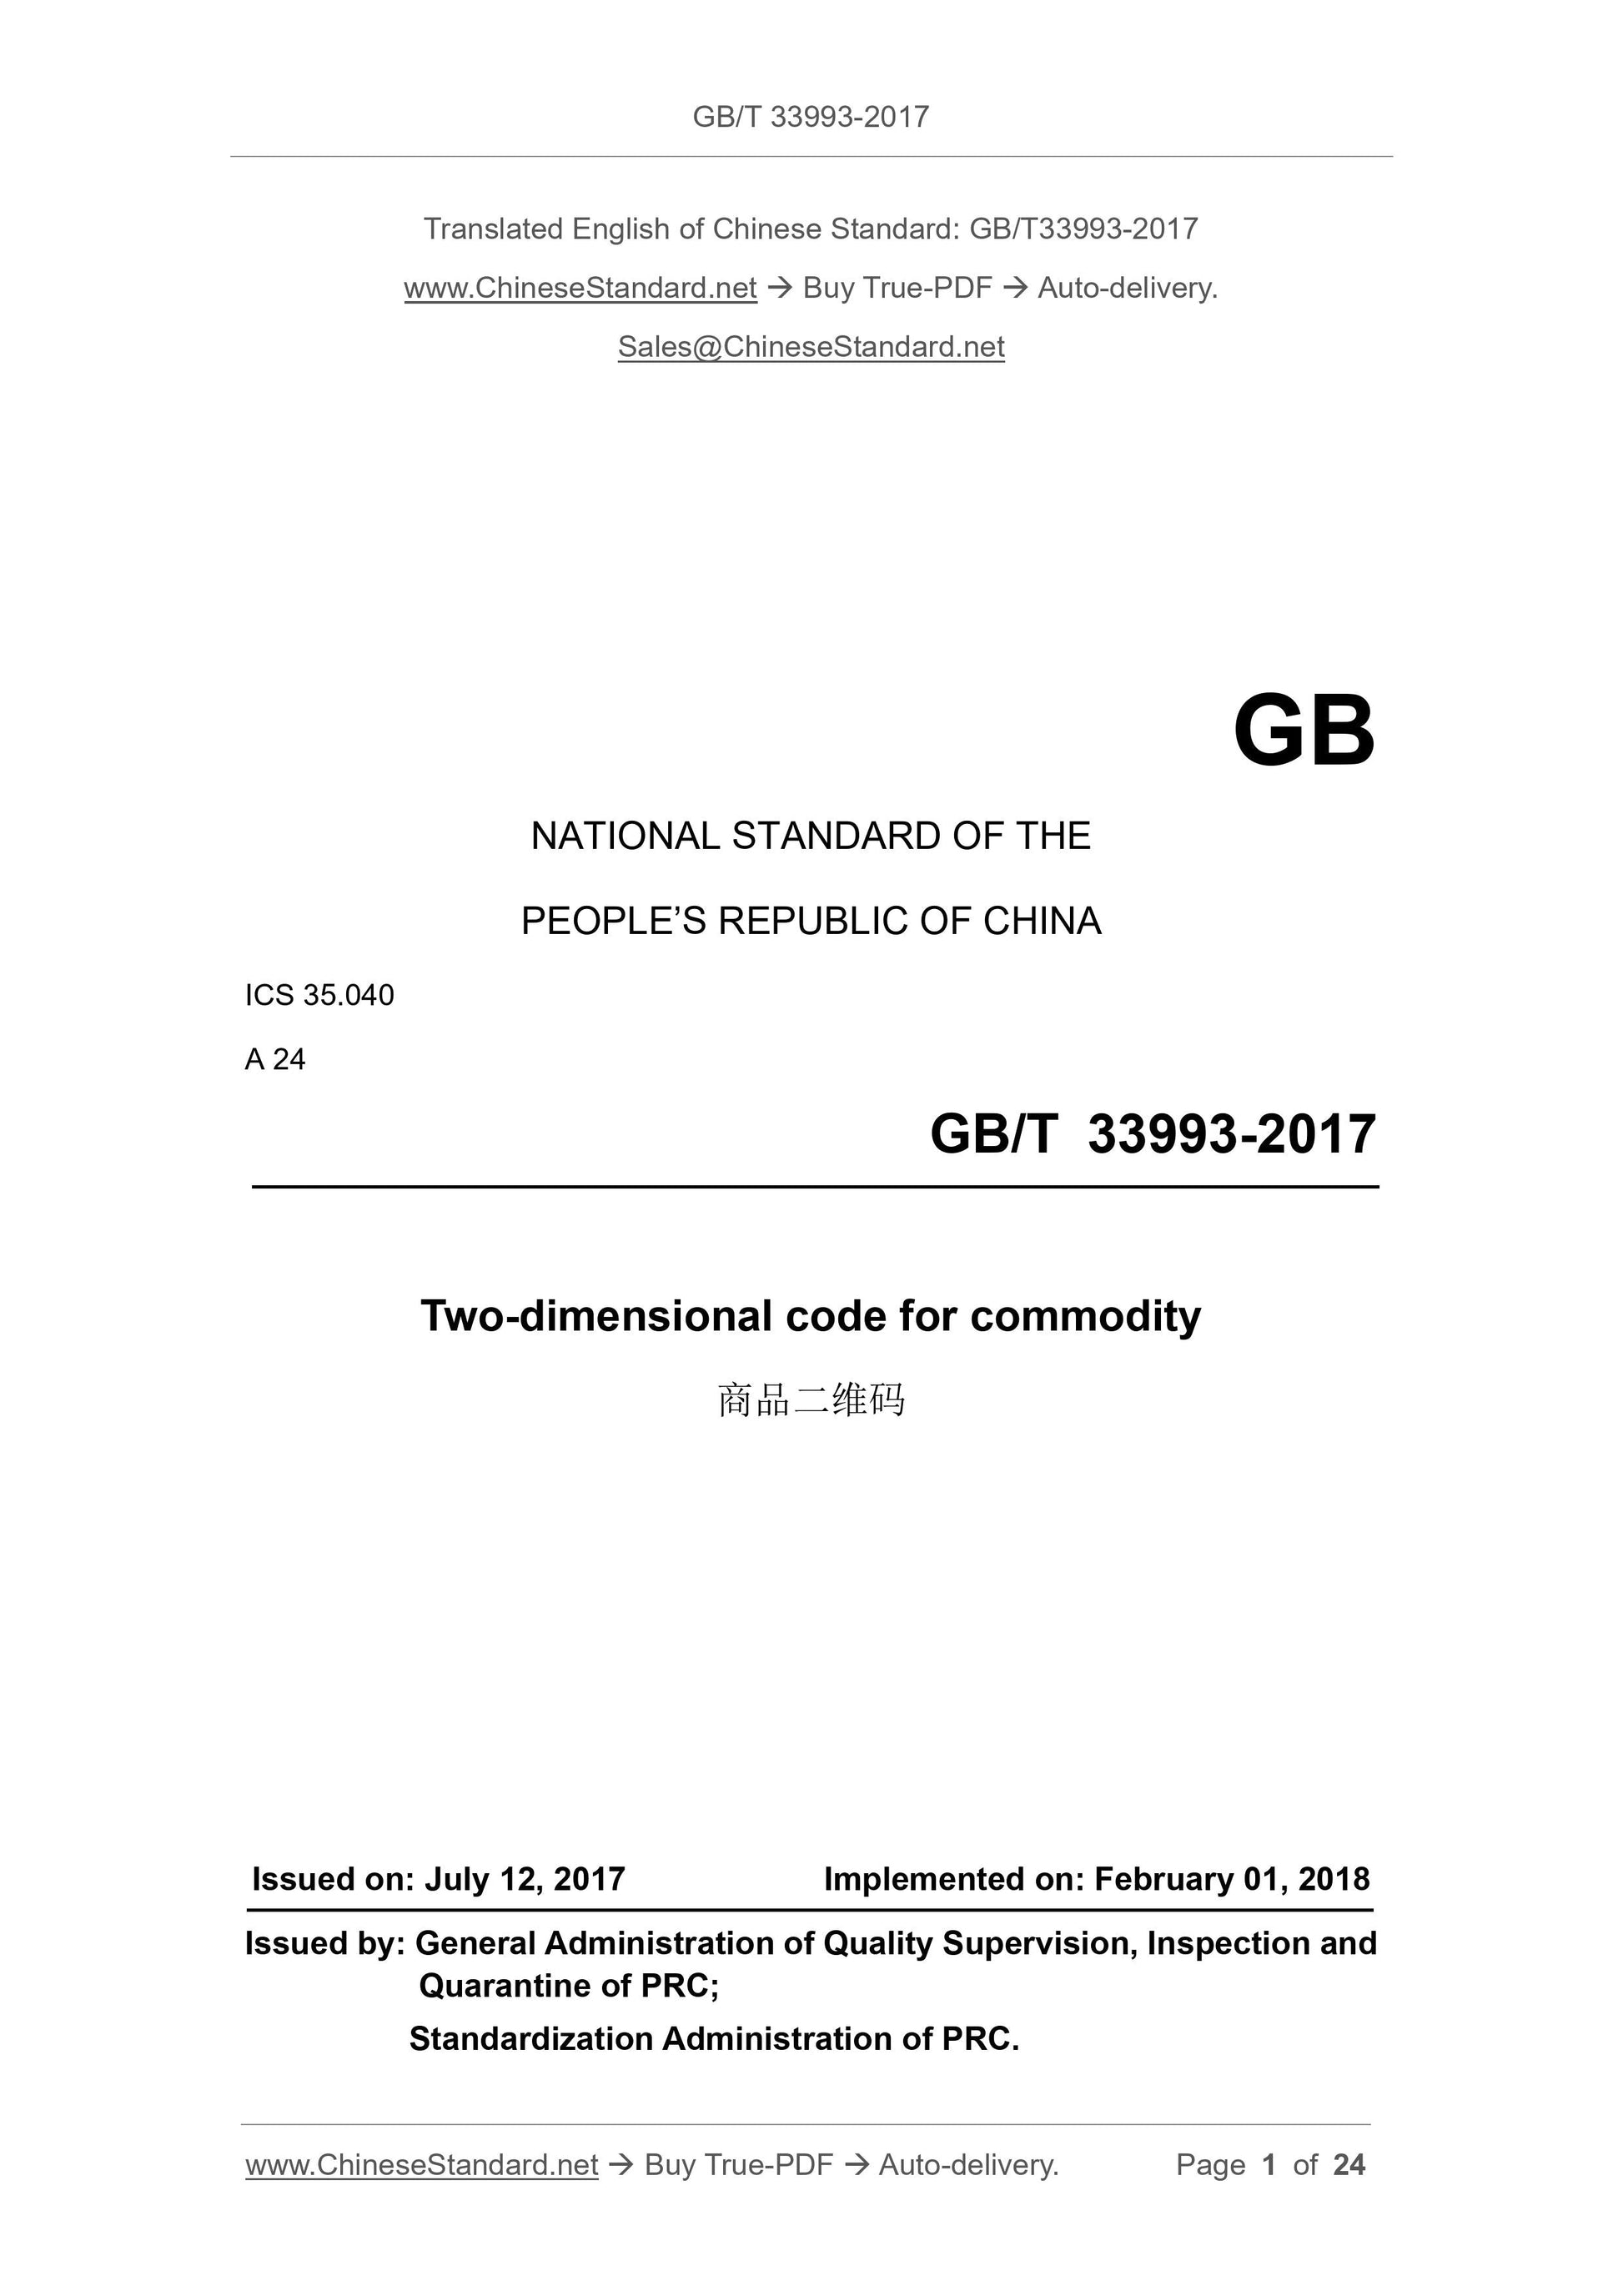 GB/T 33993-2017 Page 1